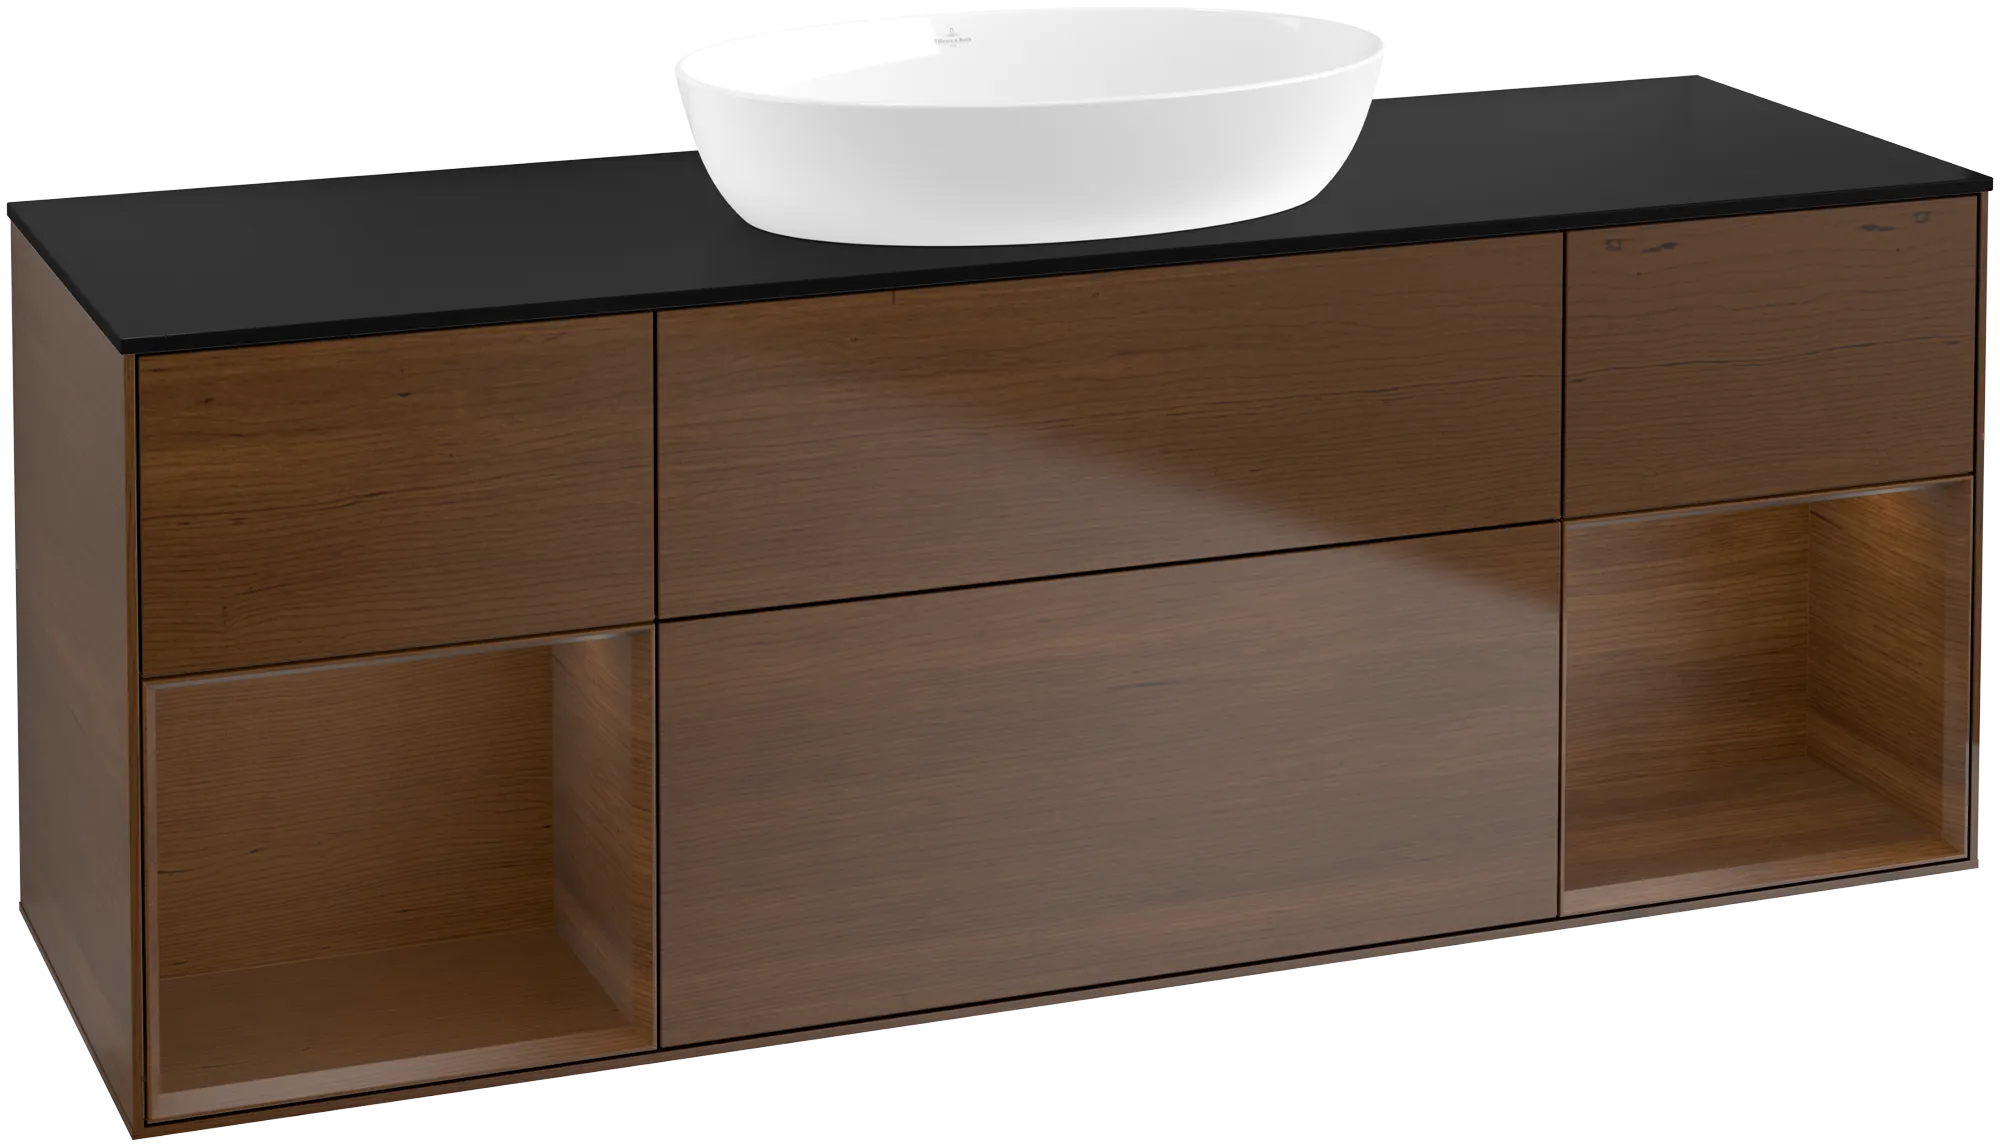 Picture of VILLEROY BOCH Finion Vanity unit, with lighting, 4 pull-out compartments, 1600 x 603 x 501 mm, Walnut Veneer / Walnut Veneer / Glass Black Matt #GD02GNGN